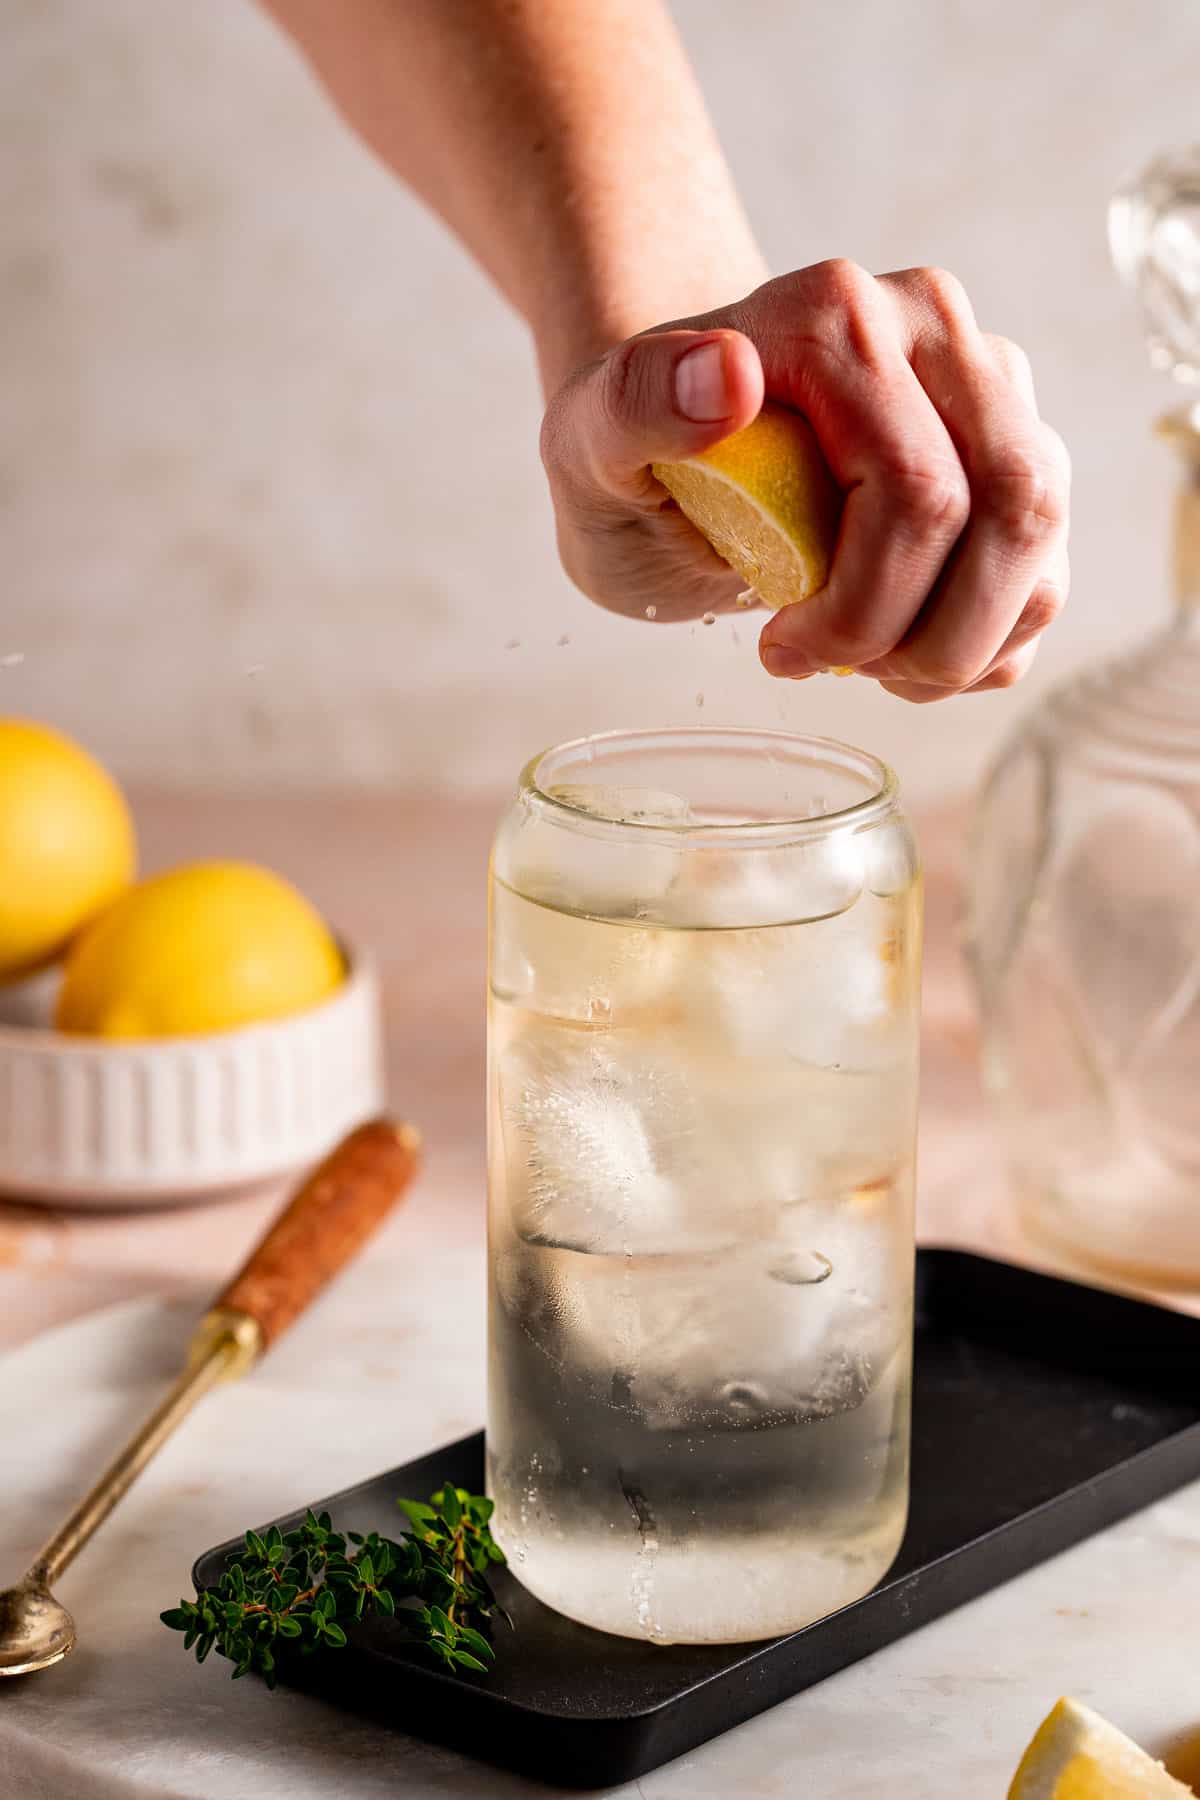 Lemon wedge being squeezed into a drink. 